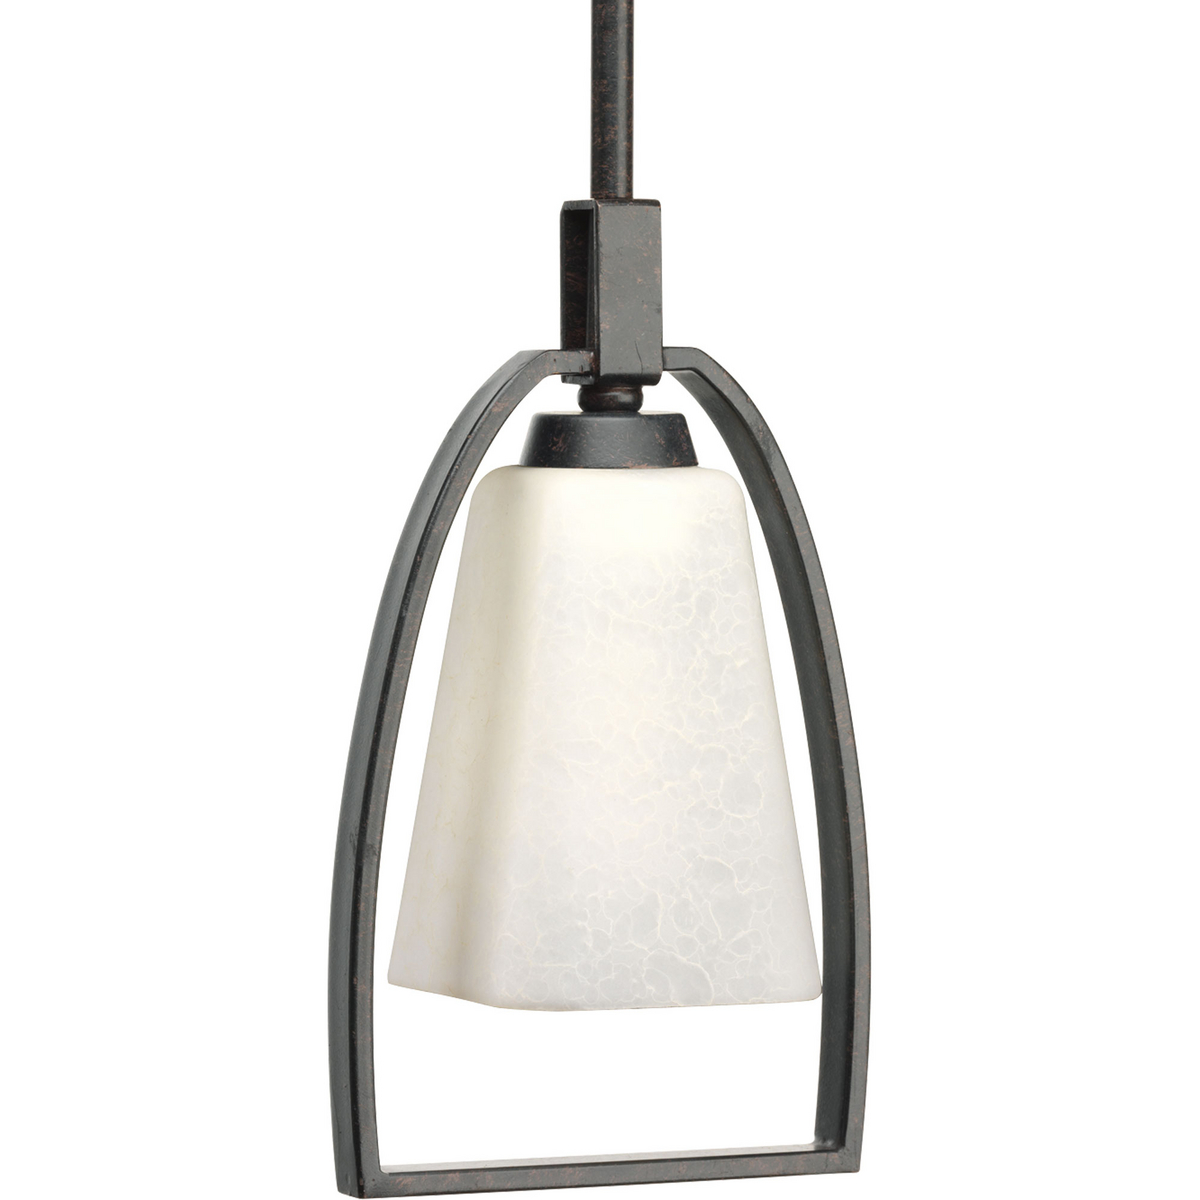 A classically designed fixture family for urban chic environments, Ridge features a clean, yet rustic, modern frame. The open design encases an etched antique watermarked glass with a tapered square form. This one-light mini-pendant is perfect for kitchens.